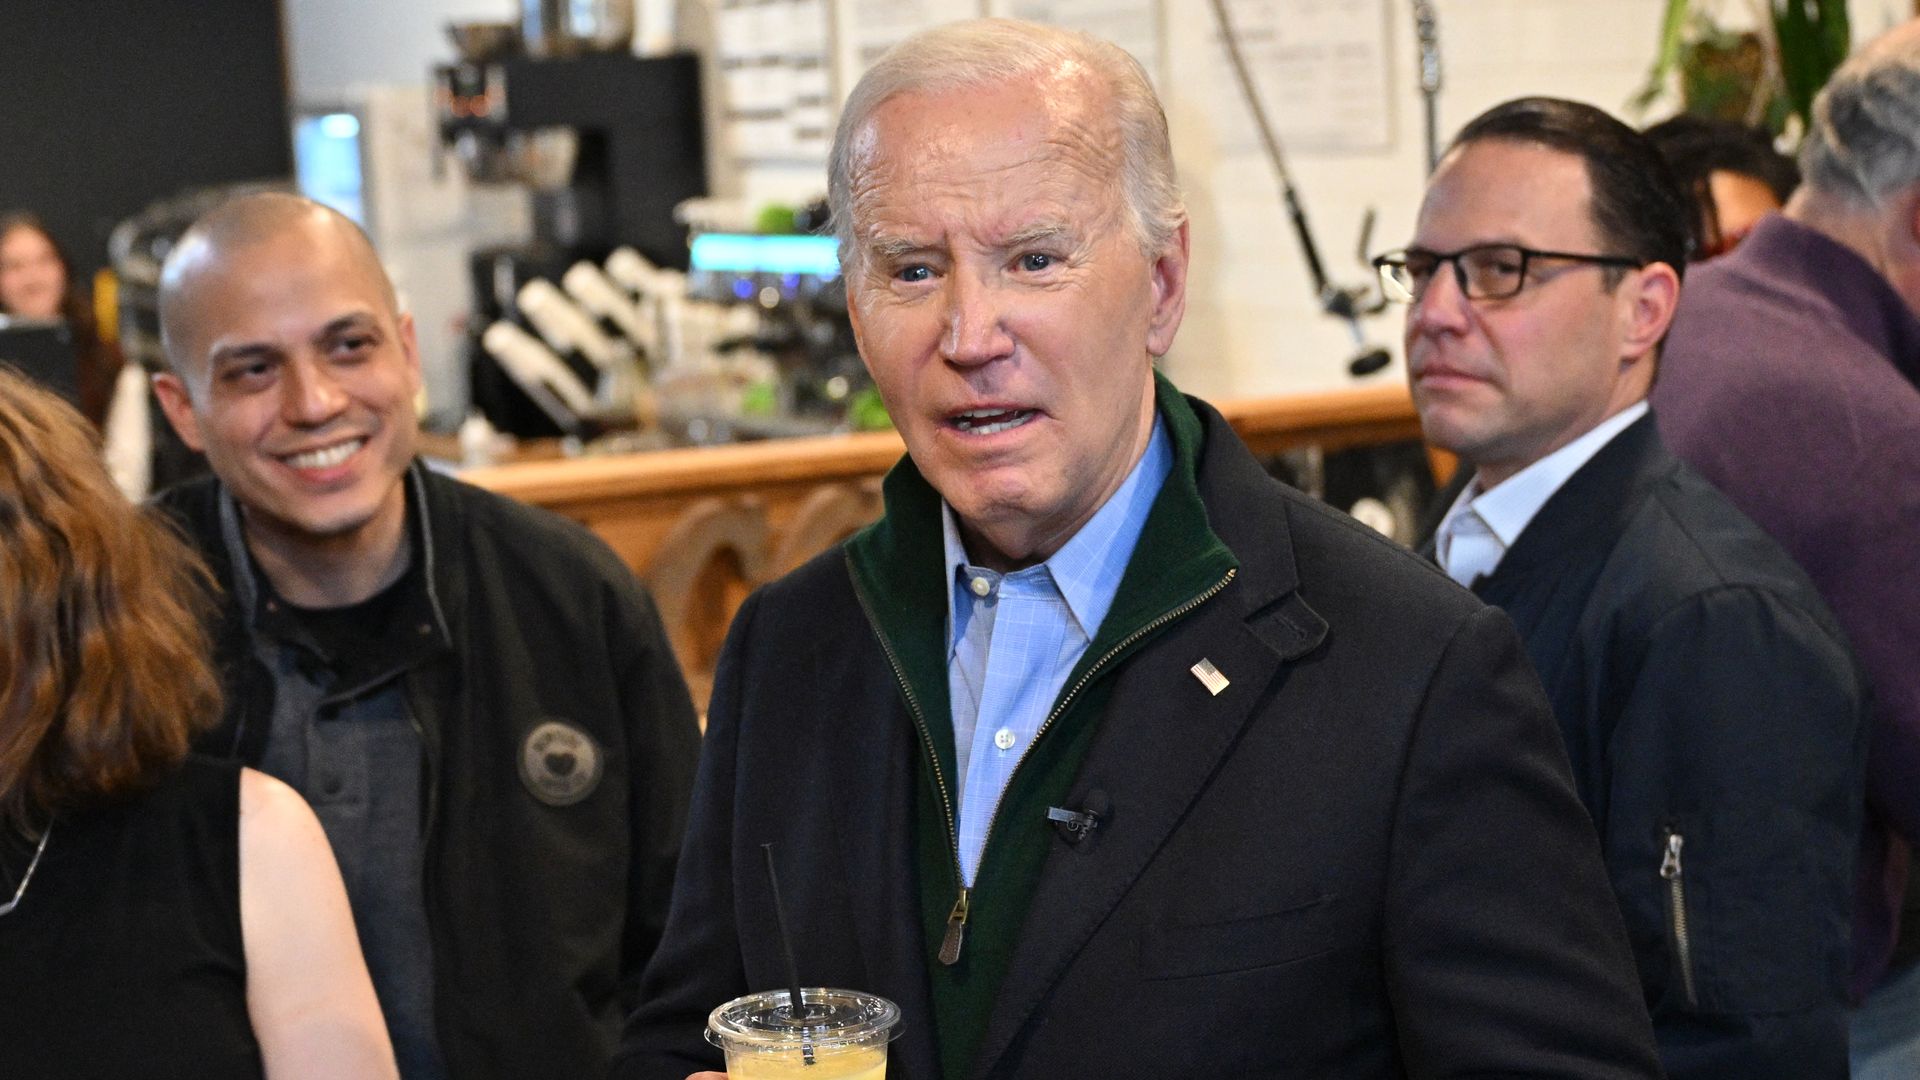 oe Biden speaks to reporters as he visits Nowhere Coffee shop in Emmaus, Pennsylvania, on January 12,